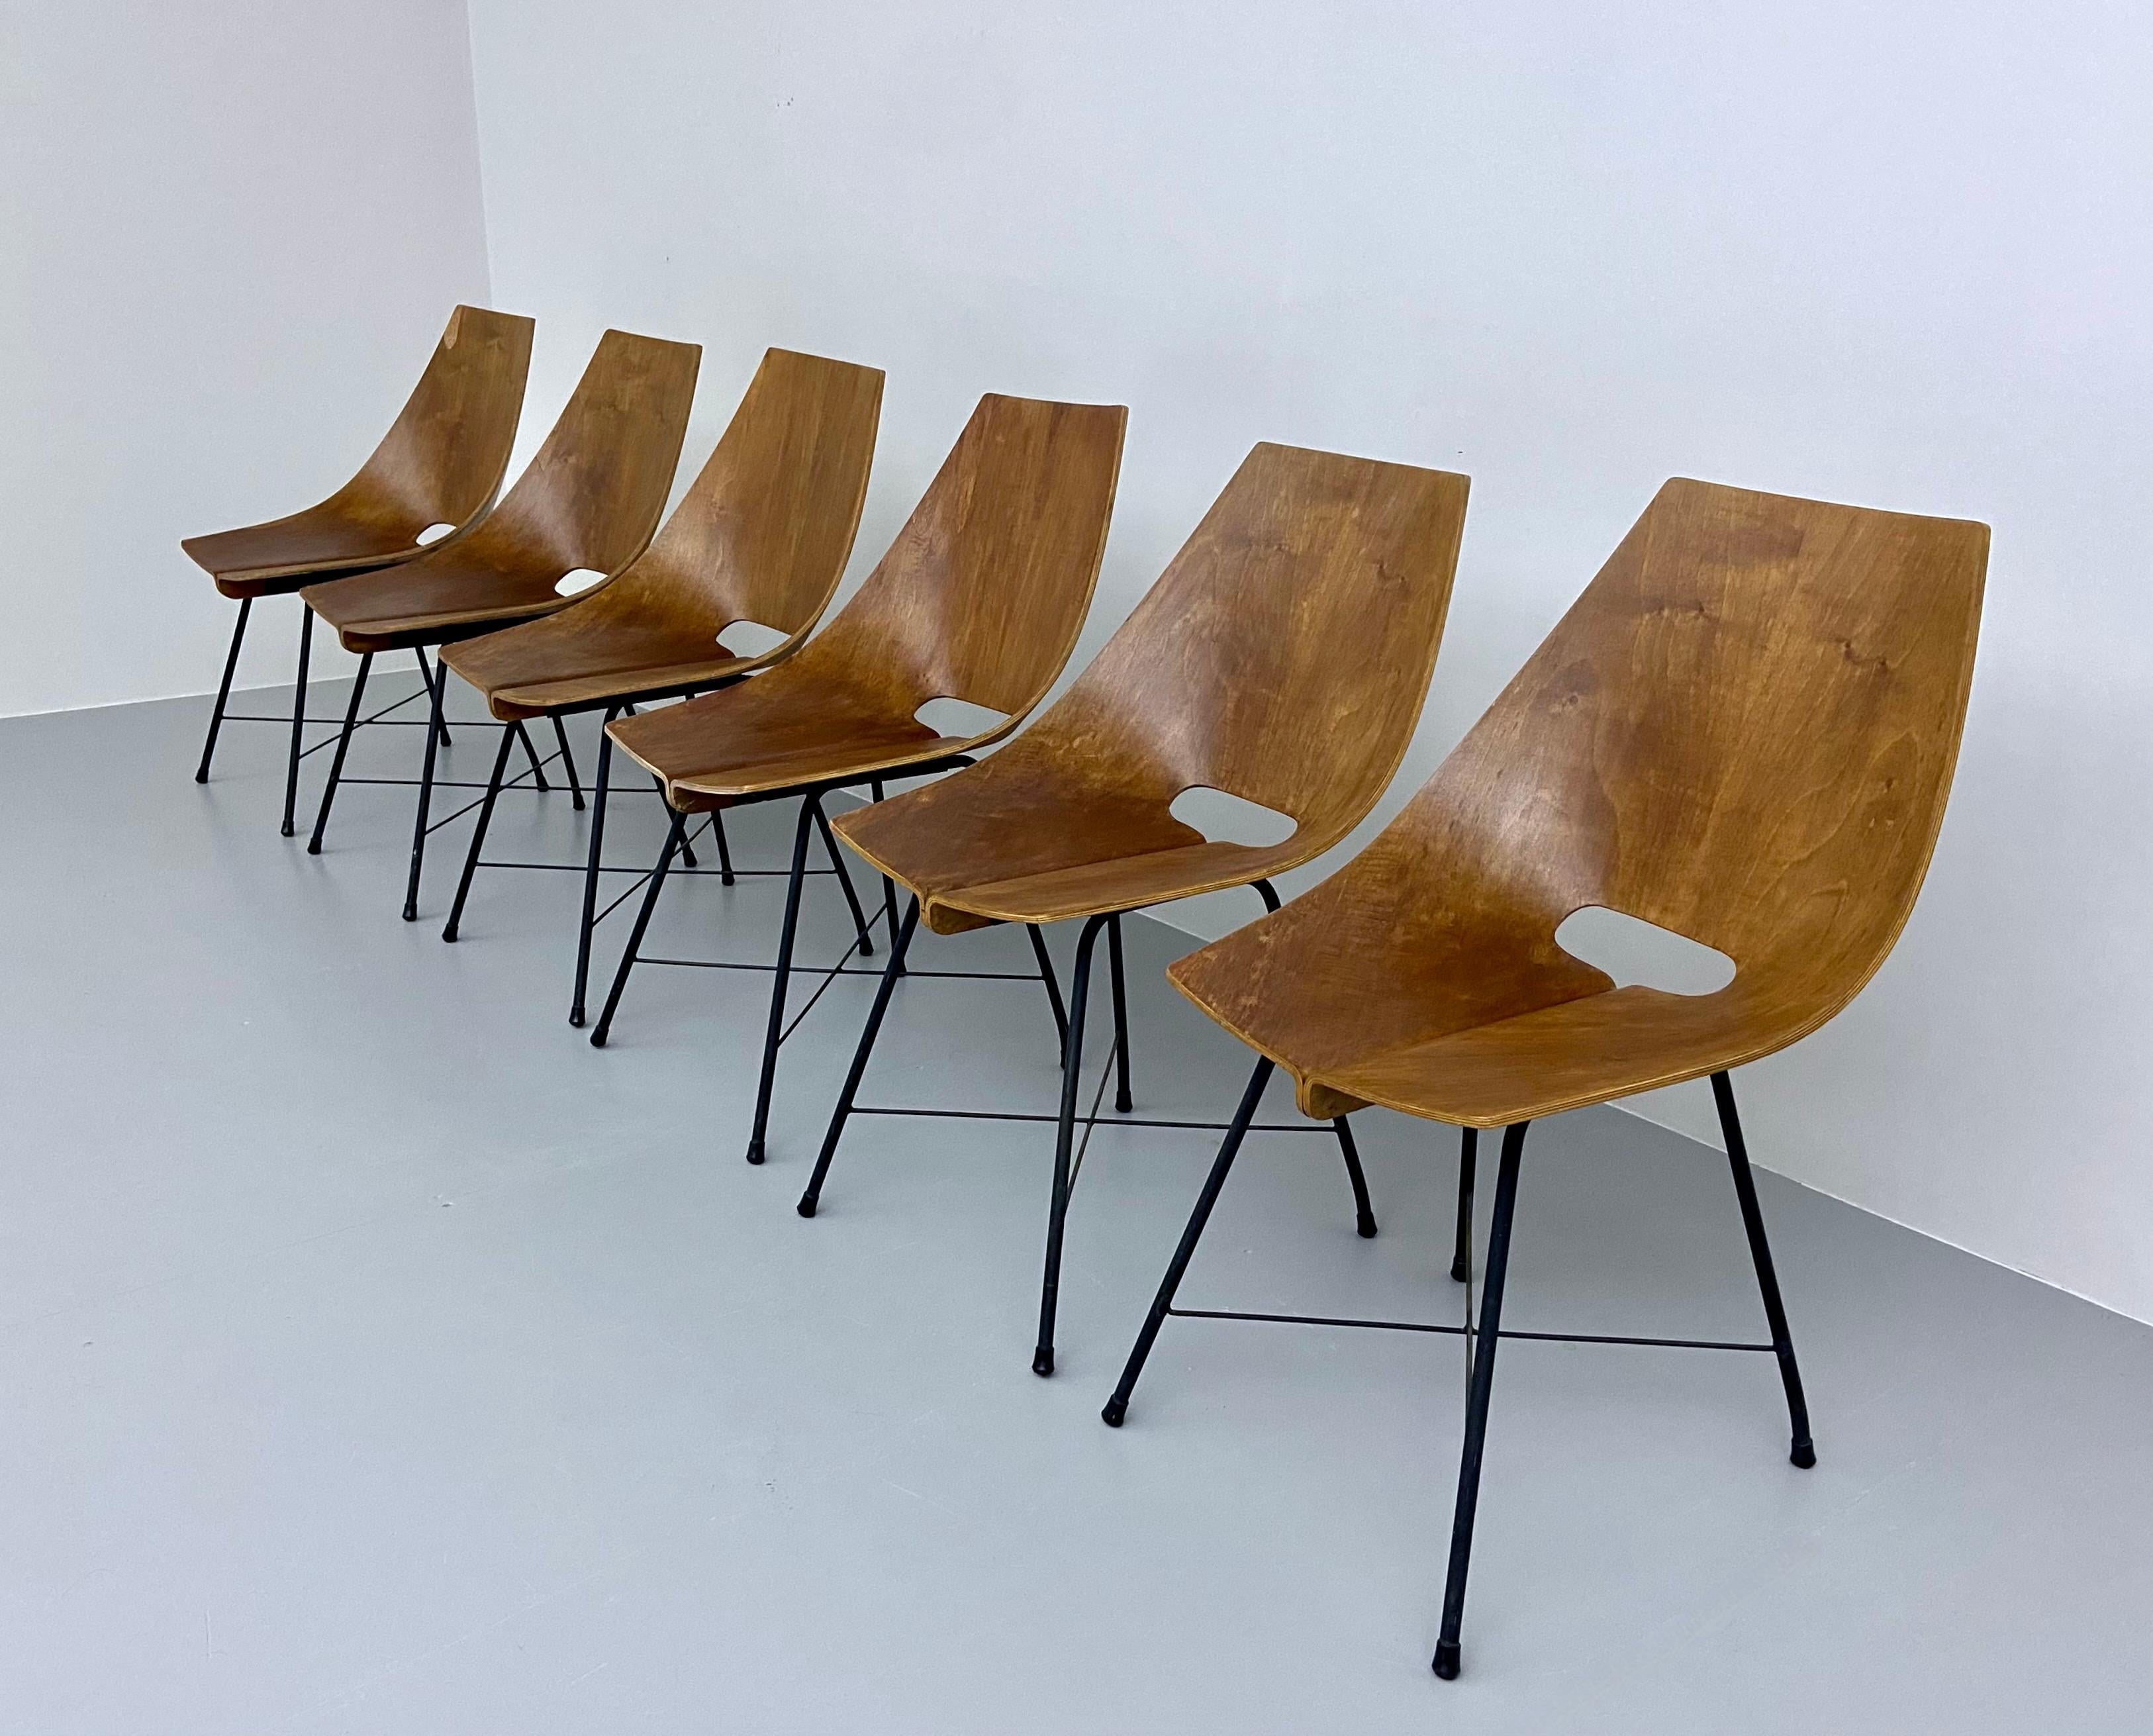 Italian Set of 6 Dining Room Chairs by Carlo Ratti in Bended Wood and Metal, Italy, 1954 For Sale